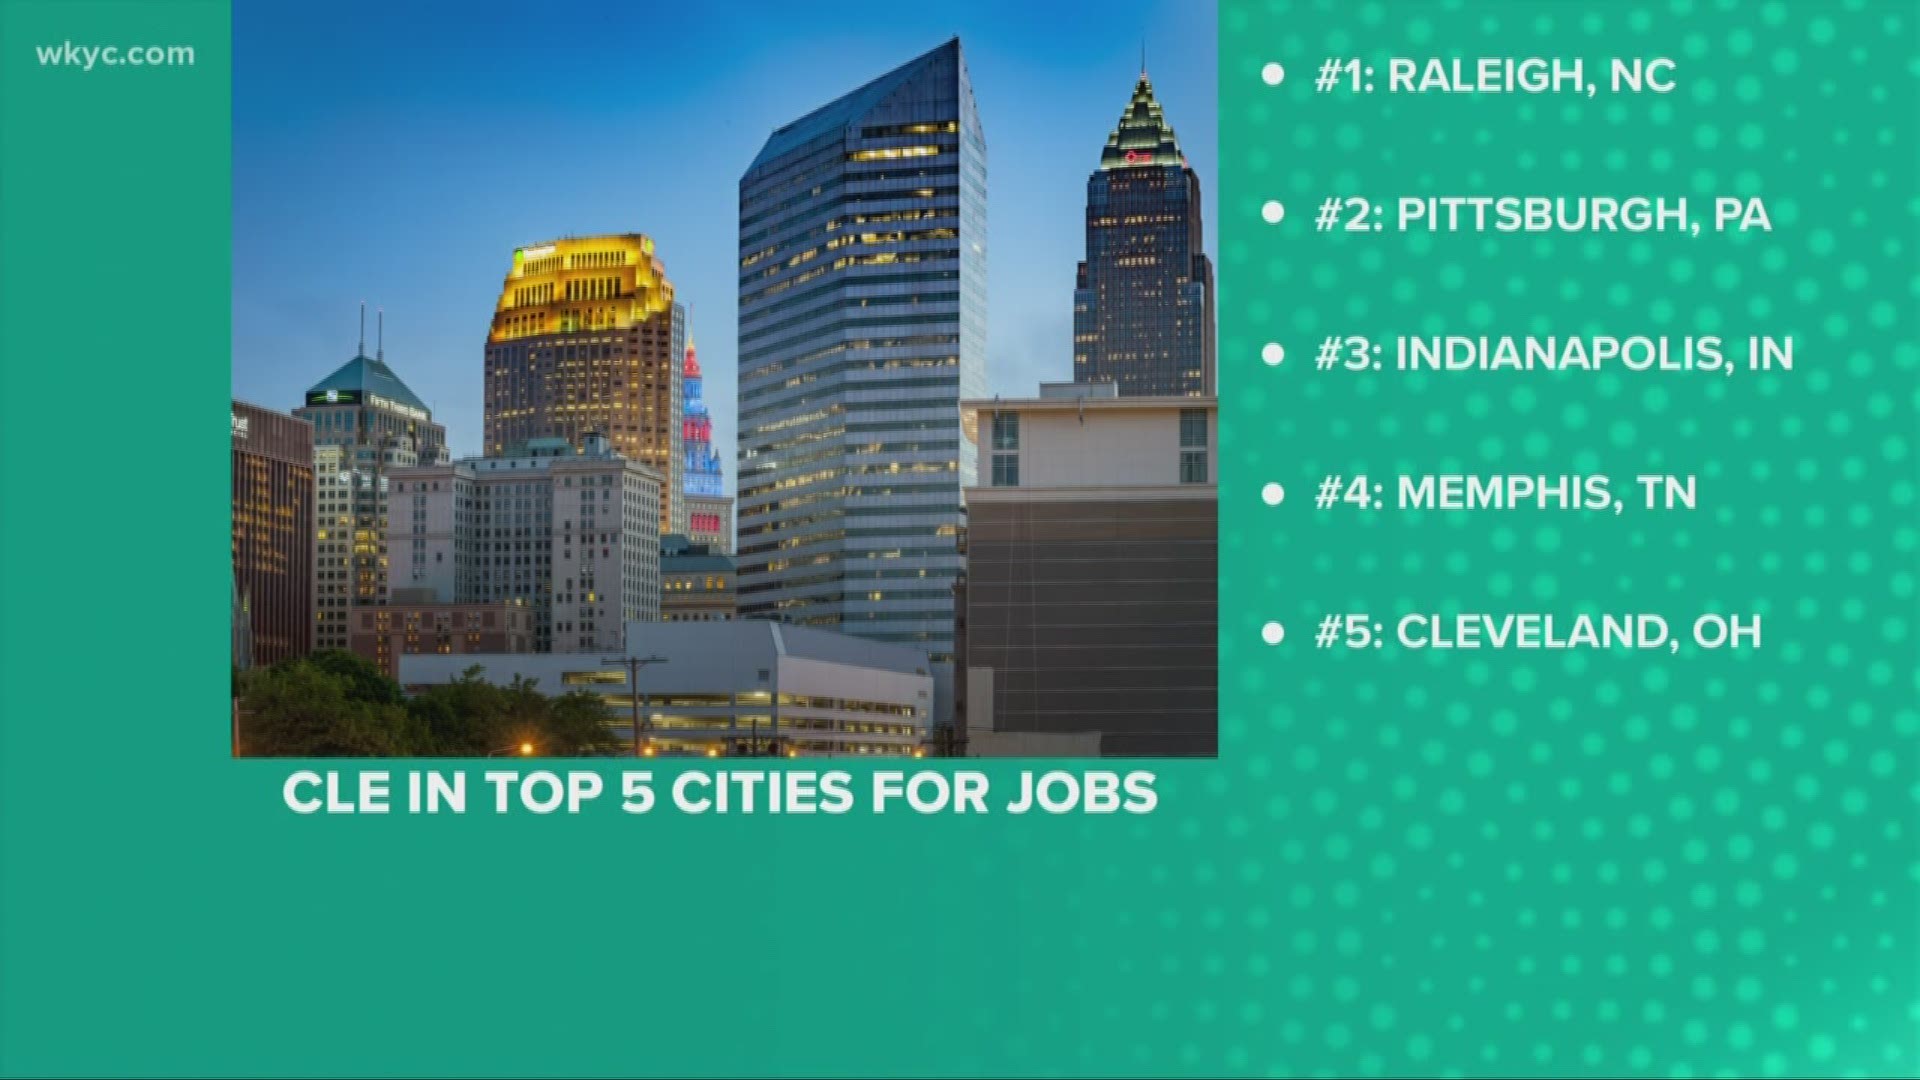 The study shows Cleveland has more than 37,000 job openings right now. Stephanie Haney gives us the details.